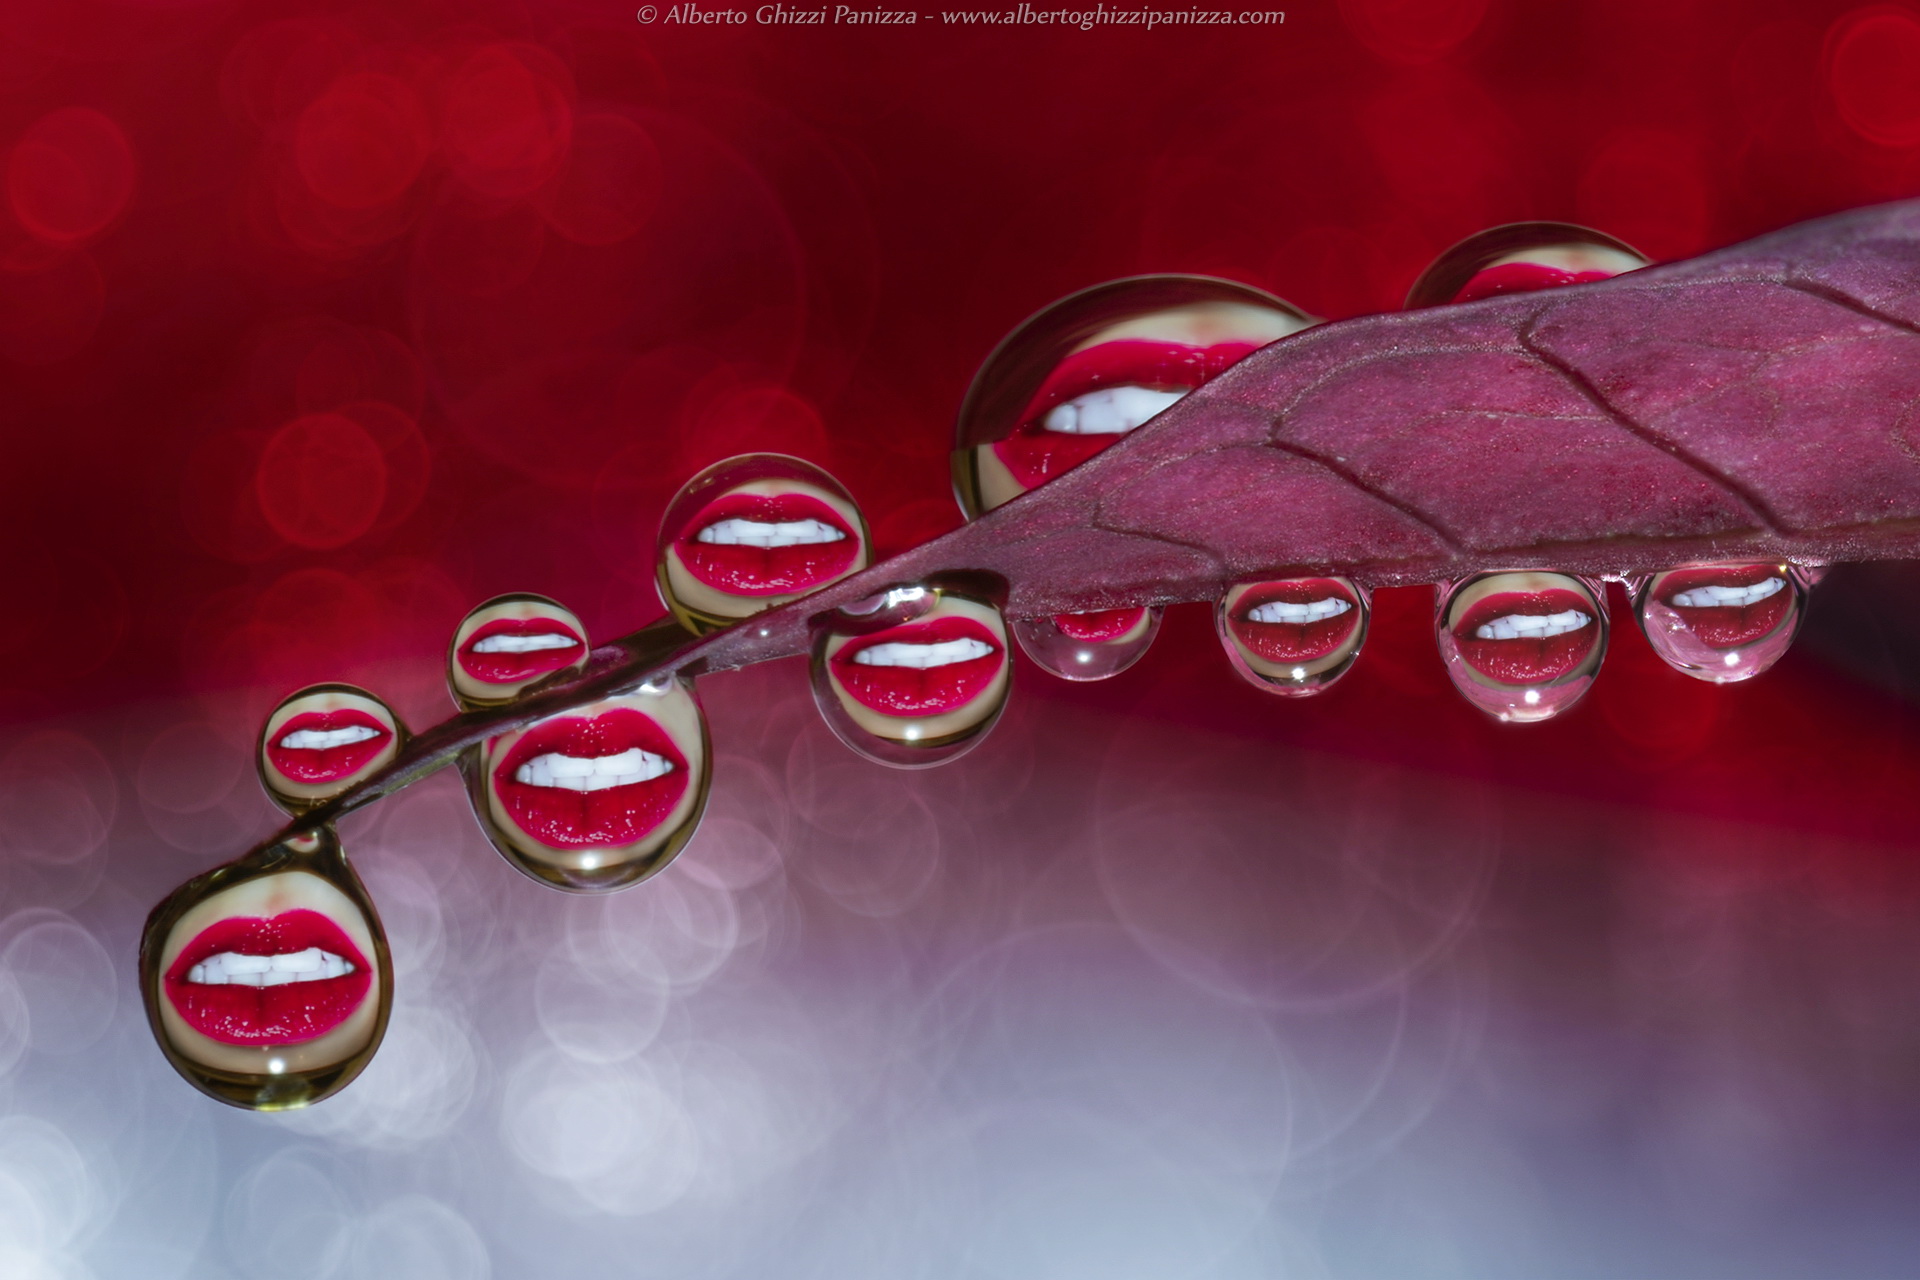 Droplets to kiss...